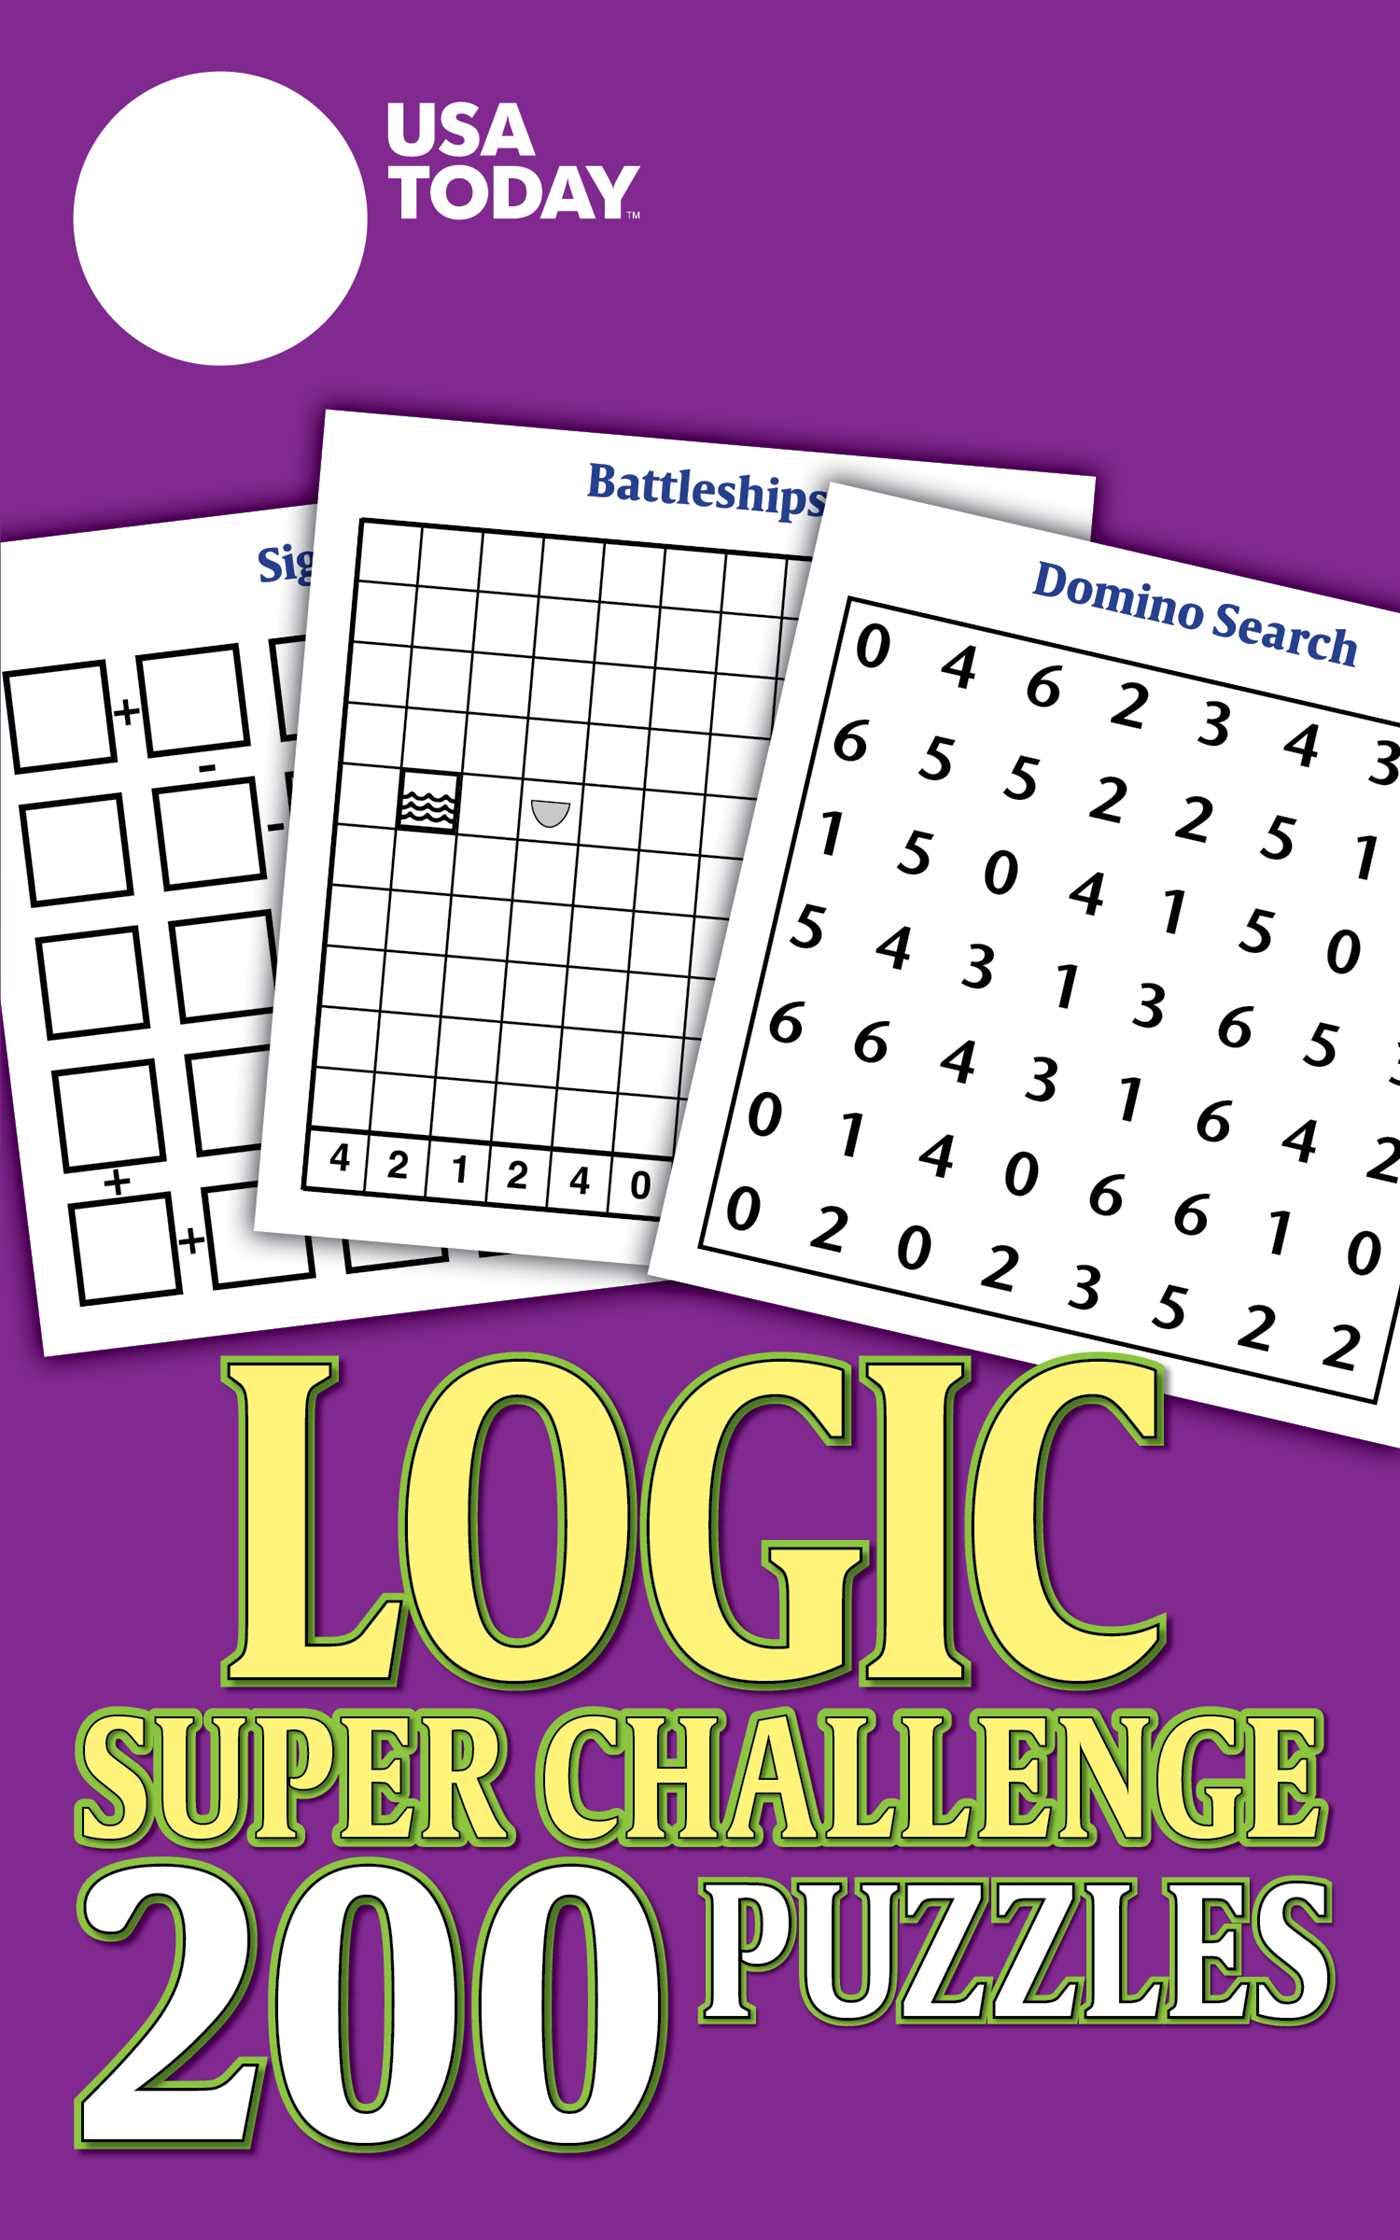 USA TODAY New Logic Puzzles